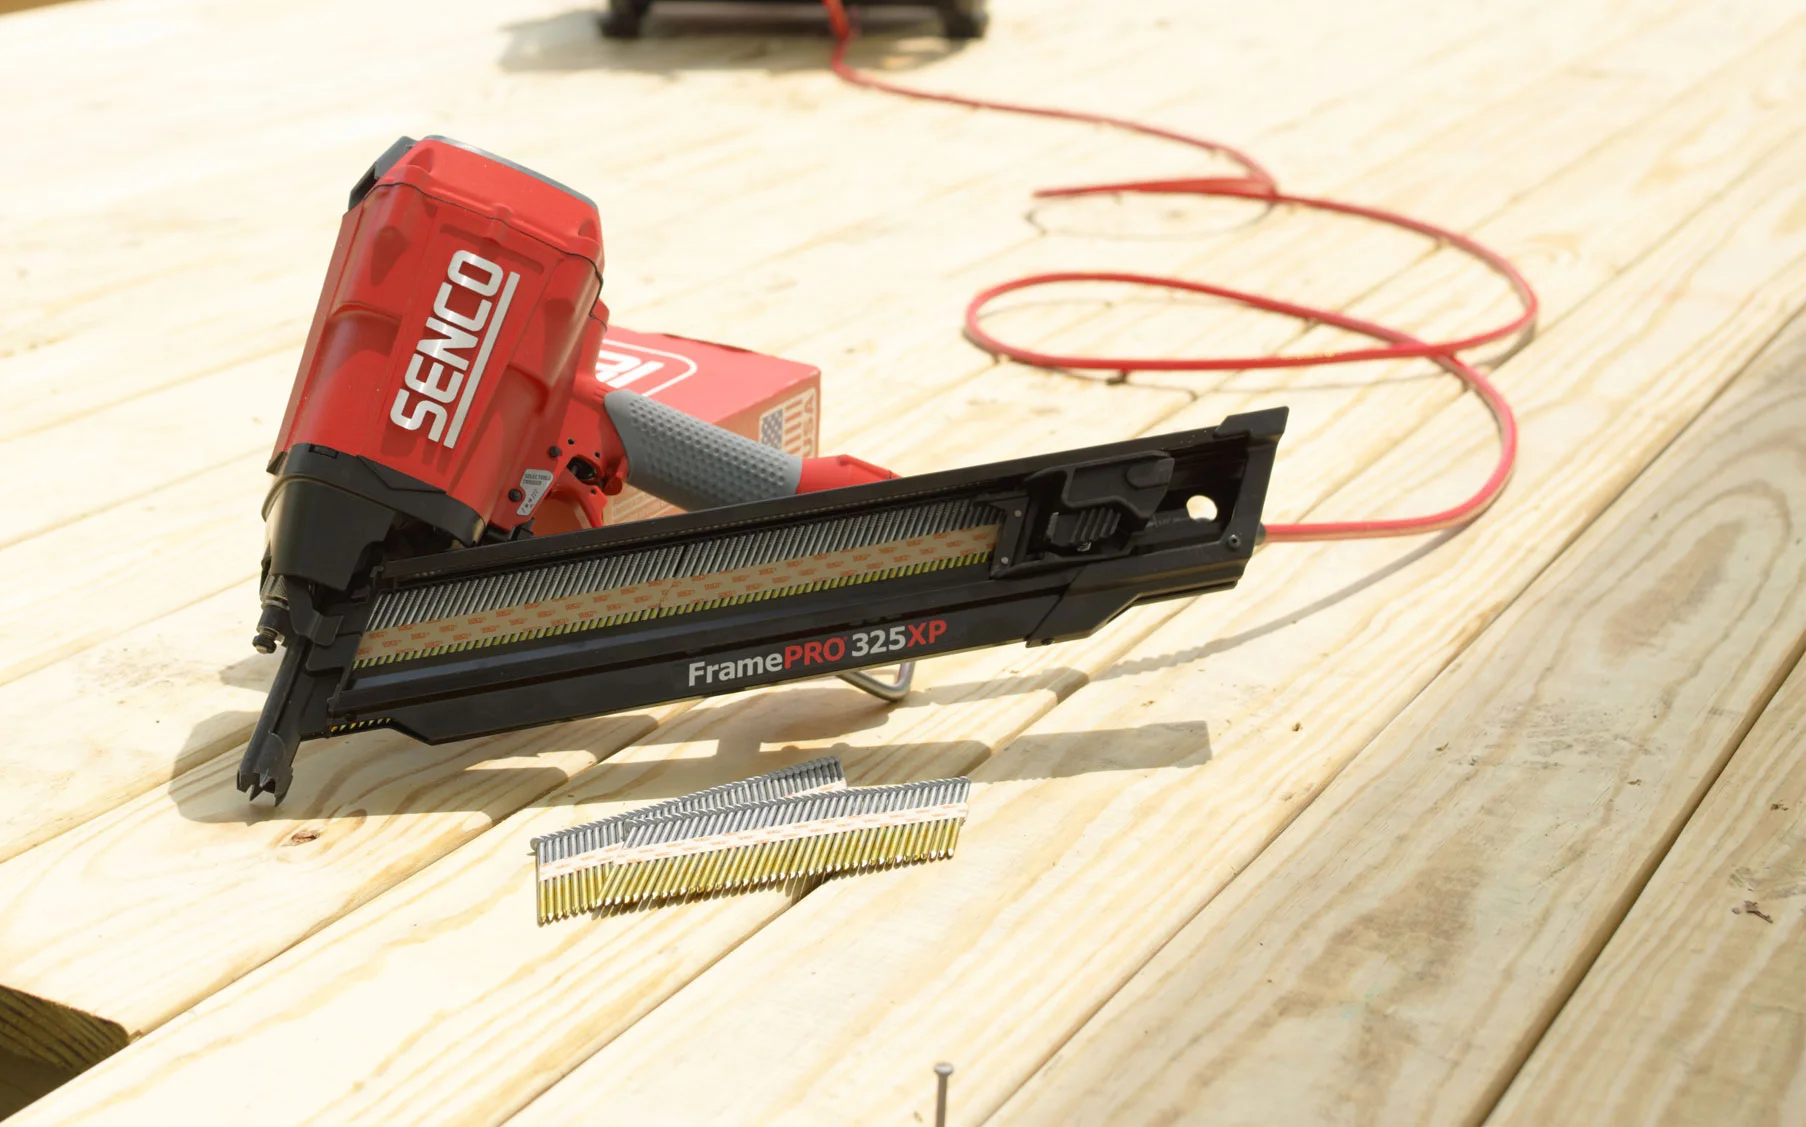 My Nailer Won’t Fire - Troubleshooting Common Causes of Jams and Misfires